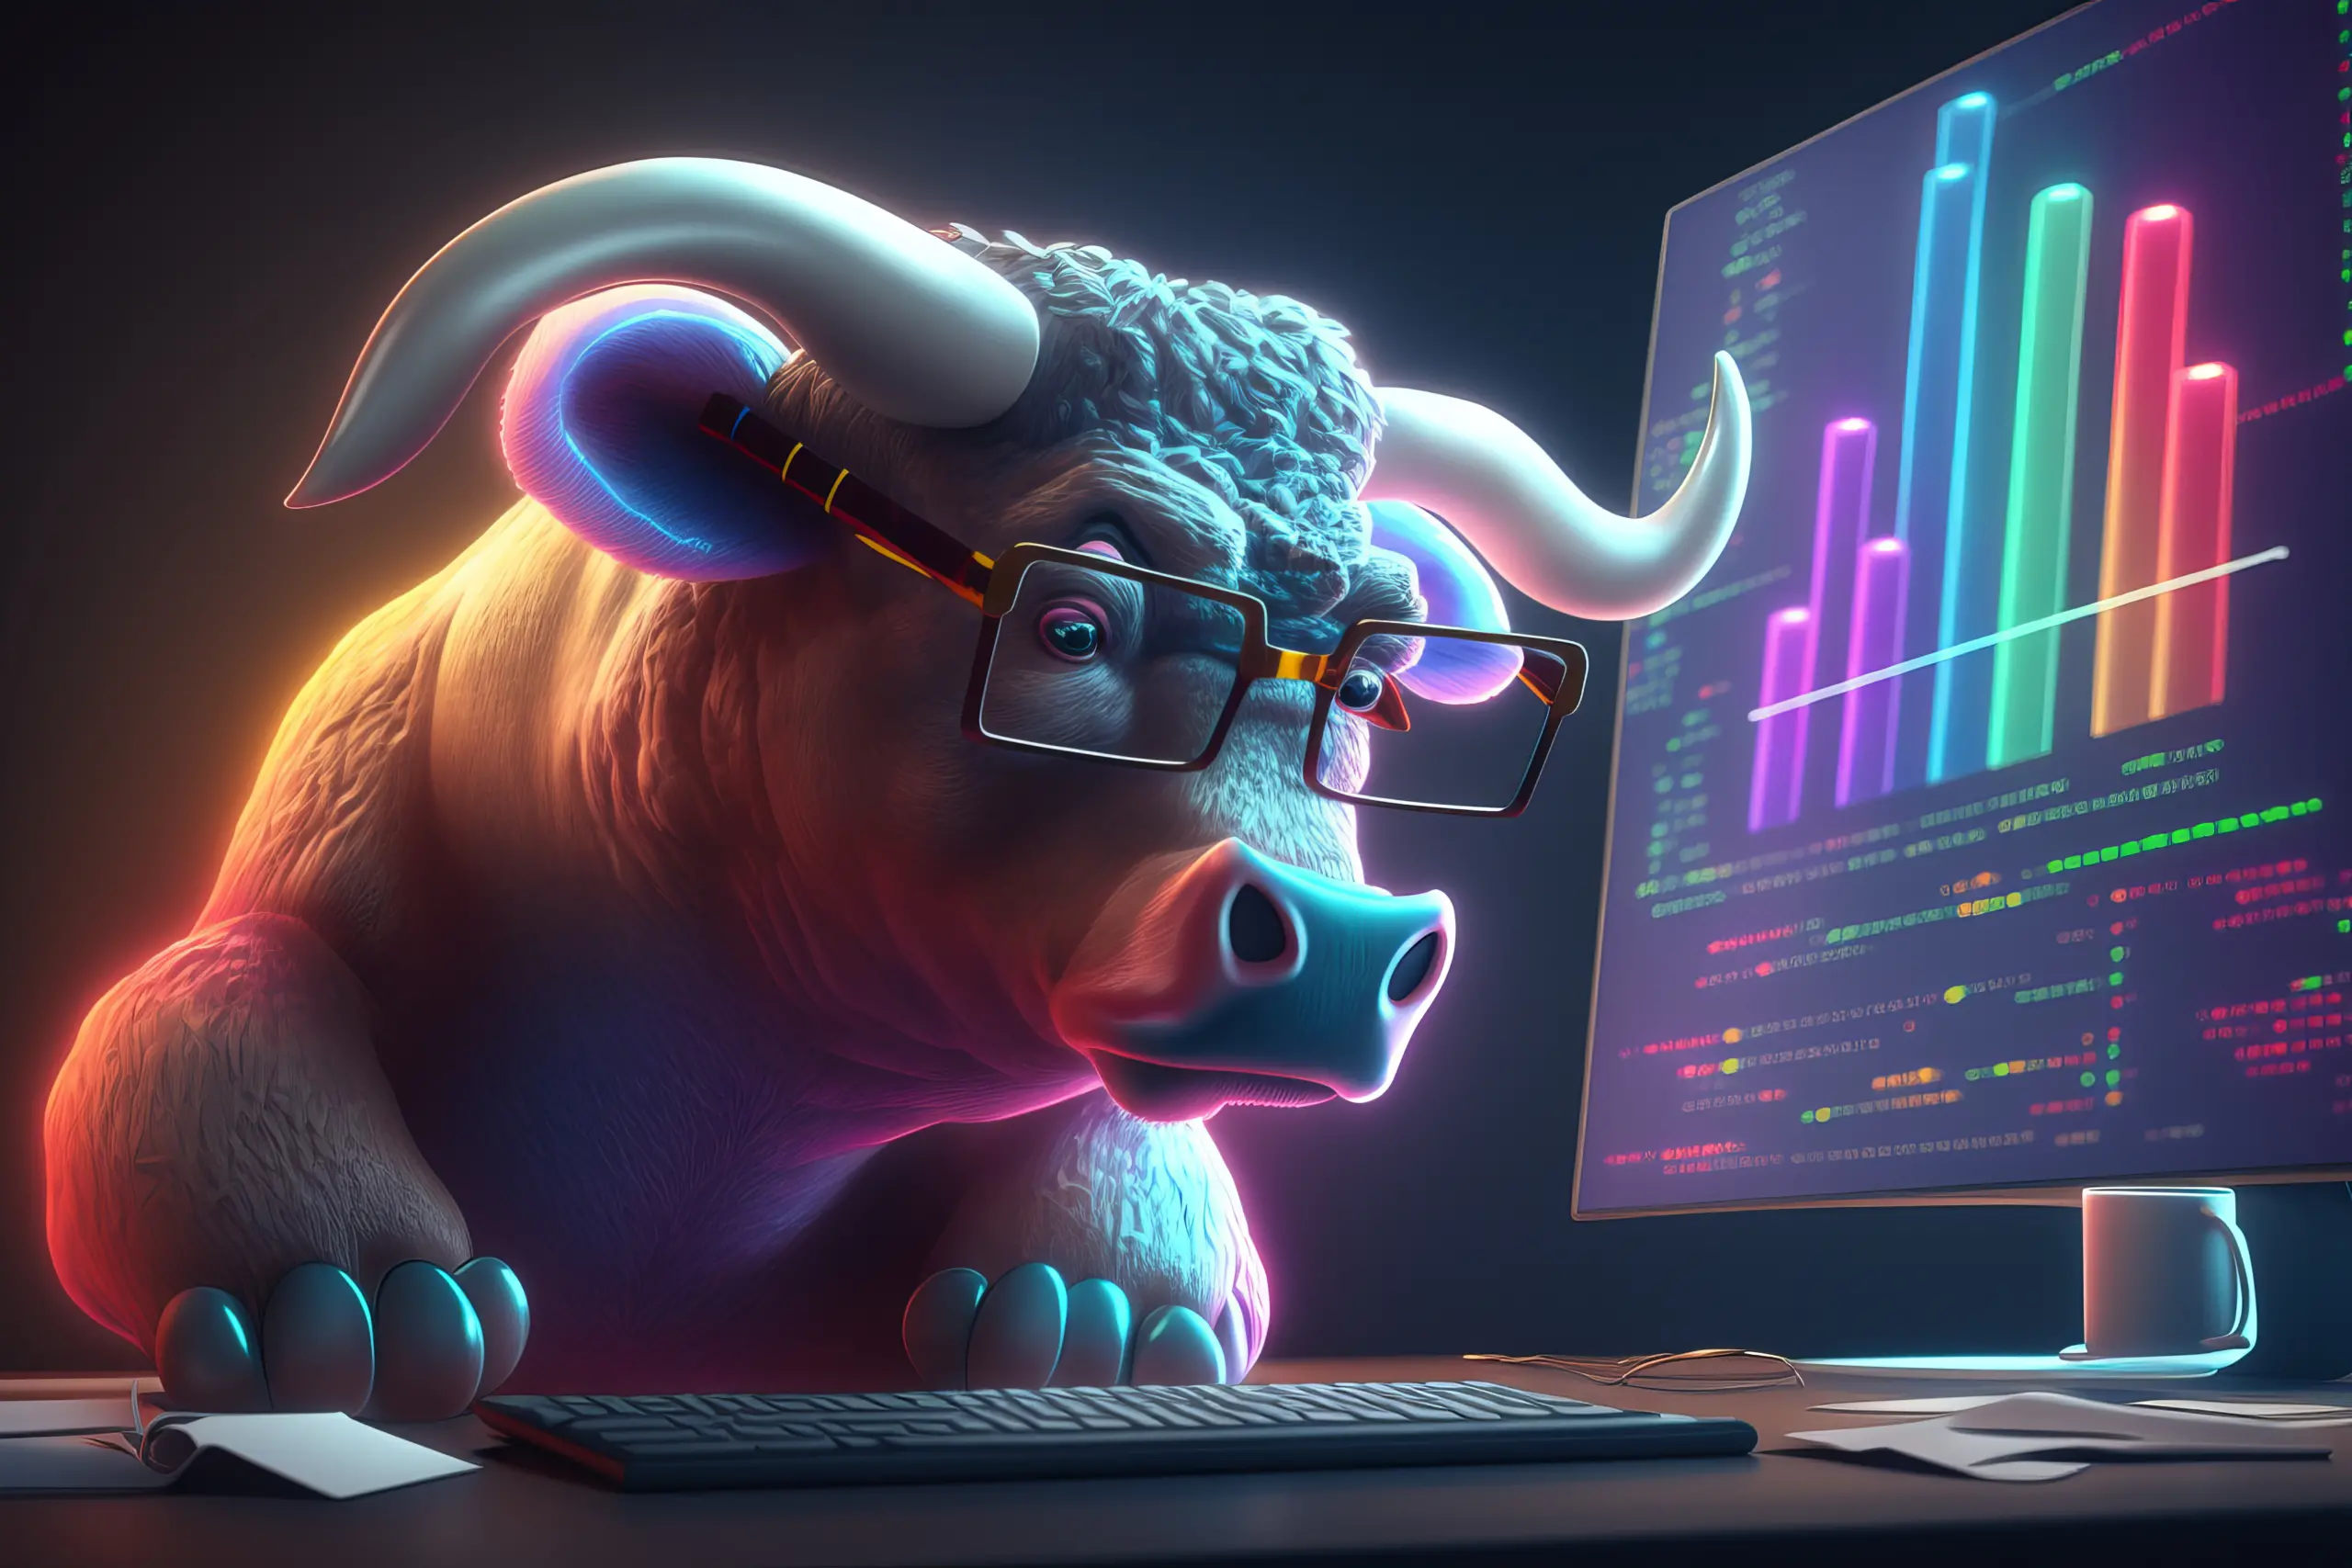 Bull trading with computer, Bullish in Stock market and Crypto currency. 